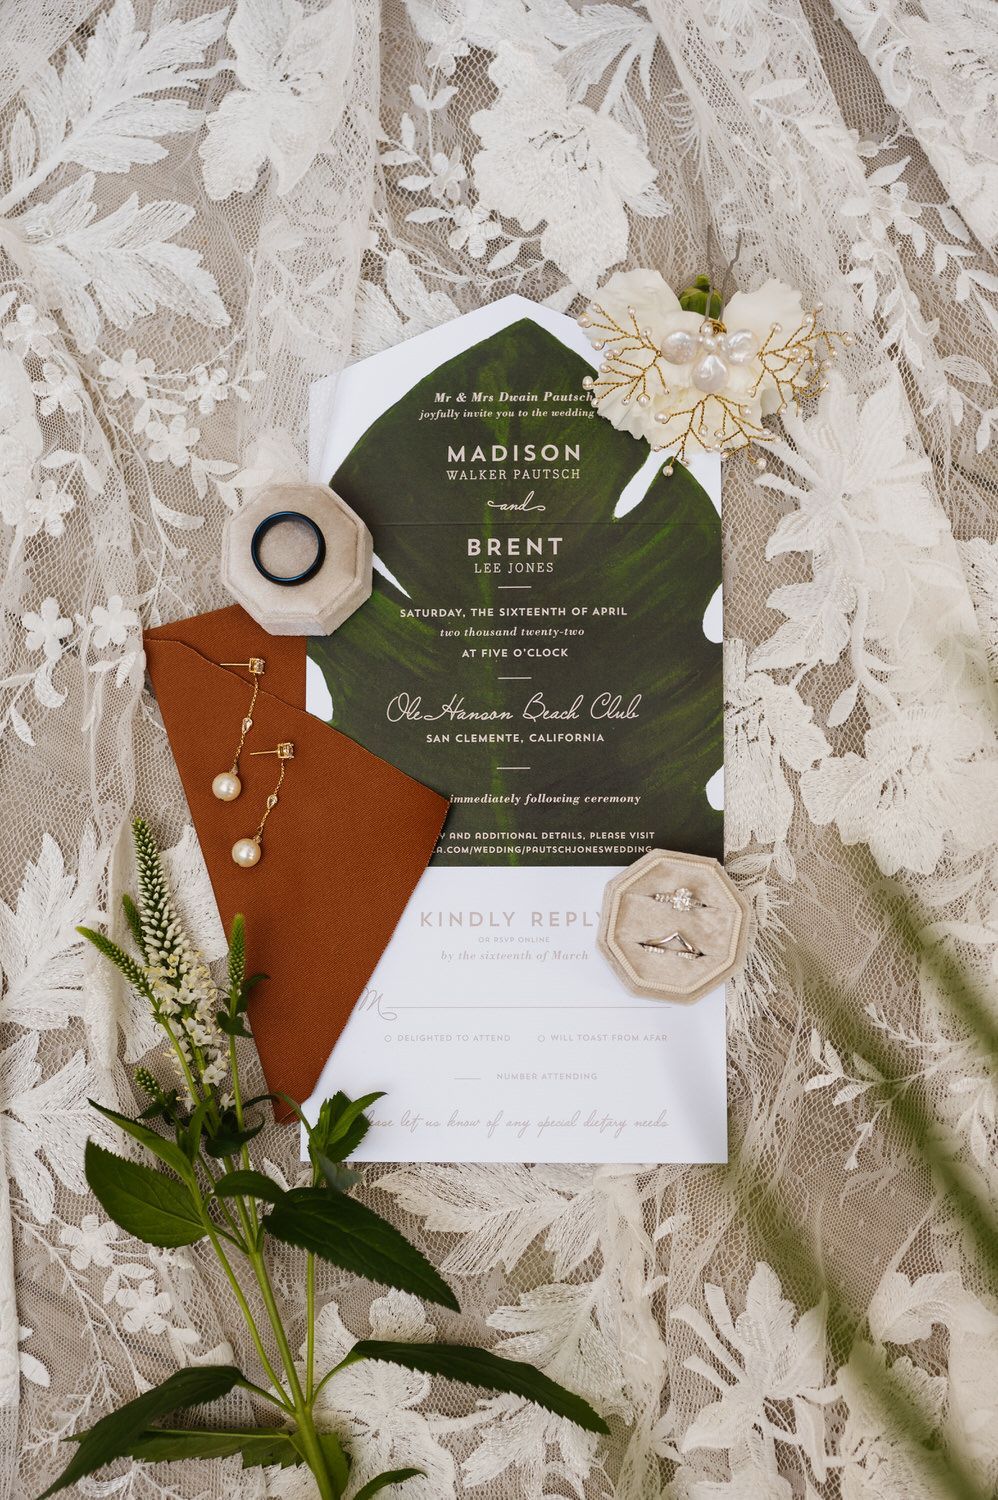 A wedding invitation is sitting on a table next to flowers and a ring.